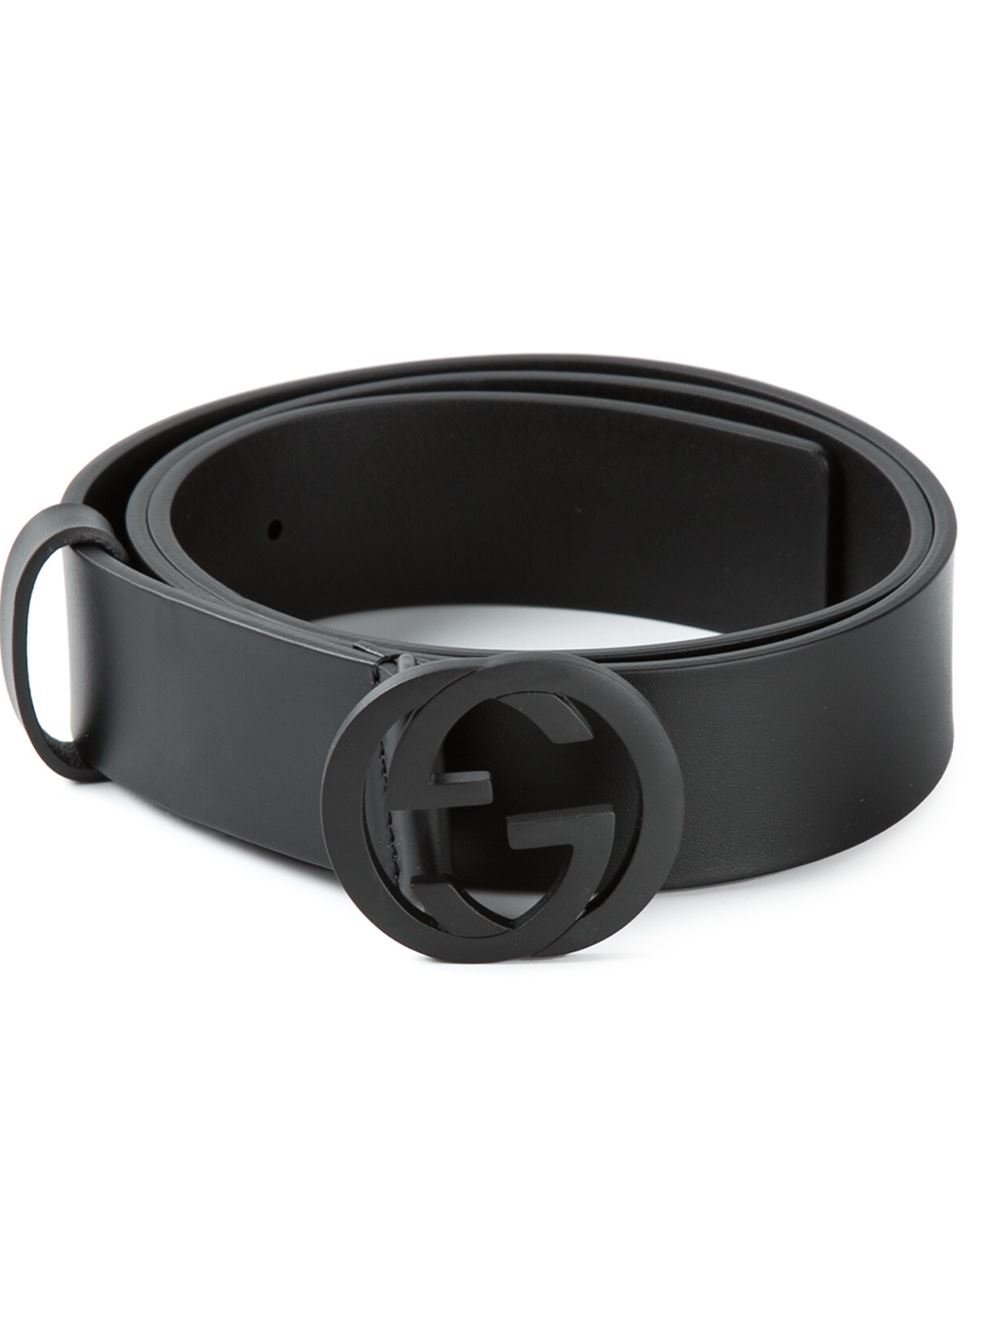 Black Male Gucci Belt | Literacy Ontario Central South